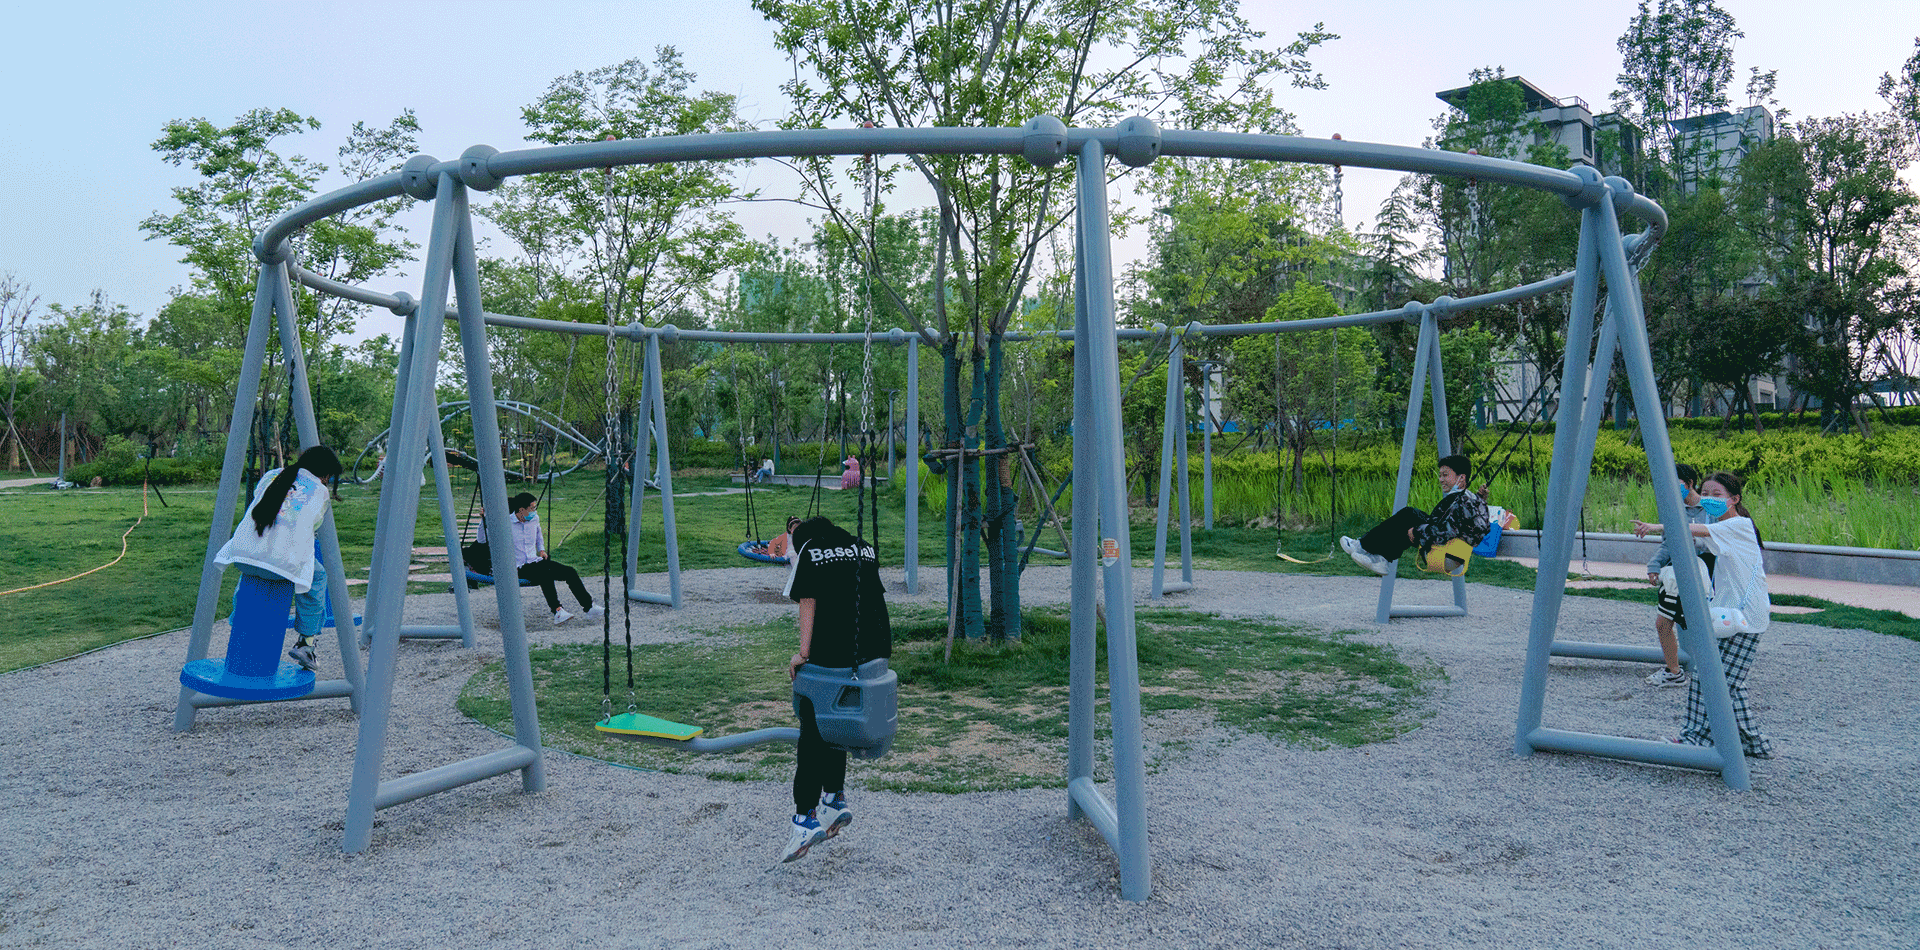 How to Develop Forest Parent-child Outdoor Playground?